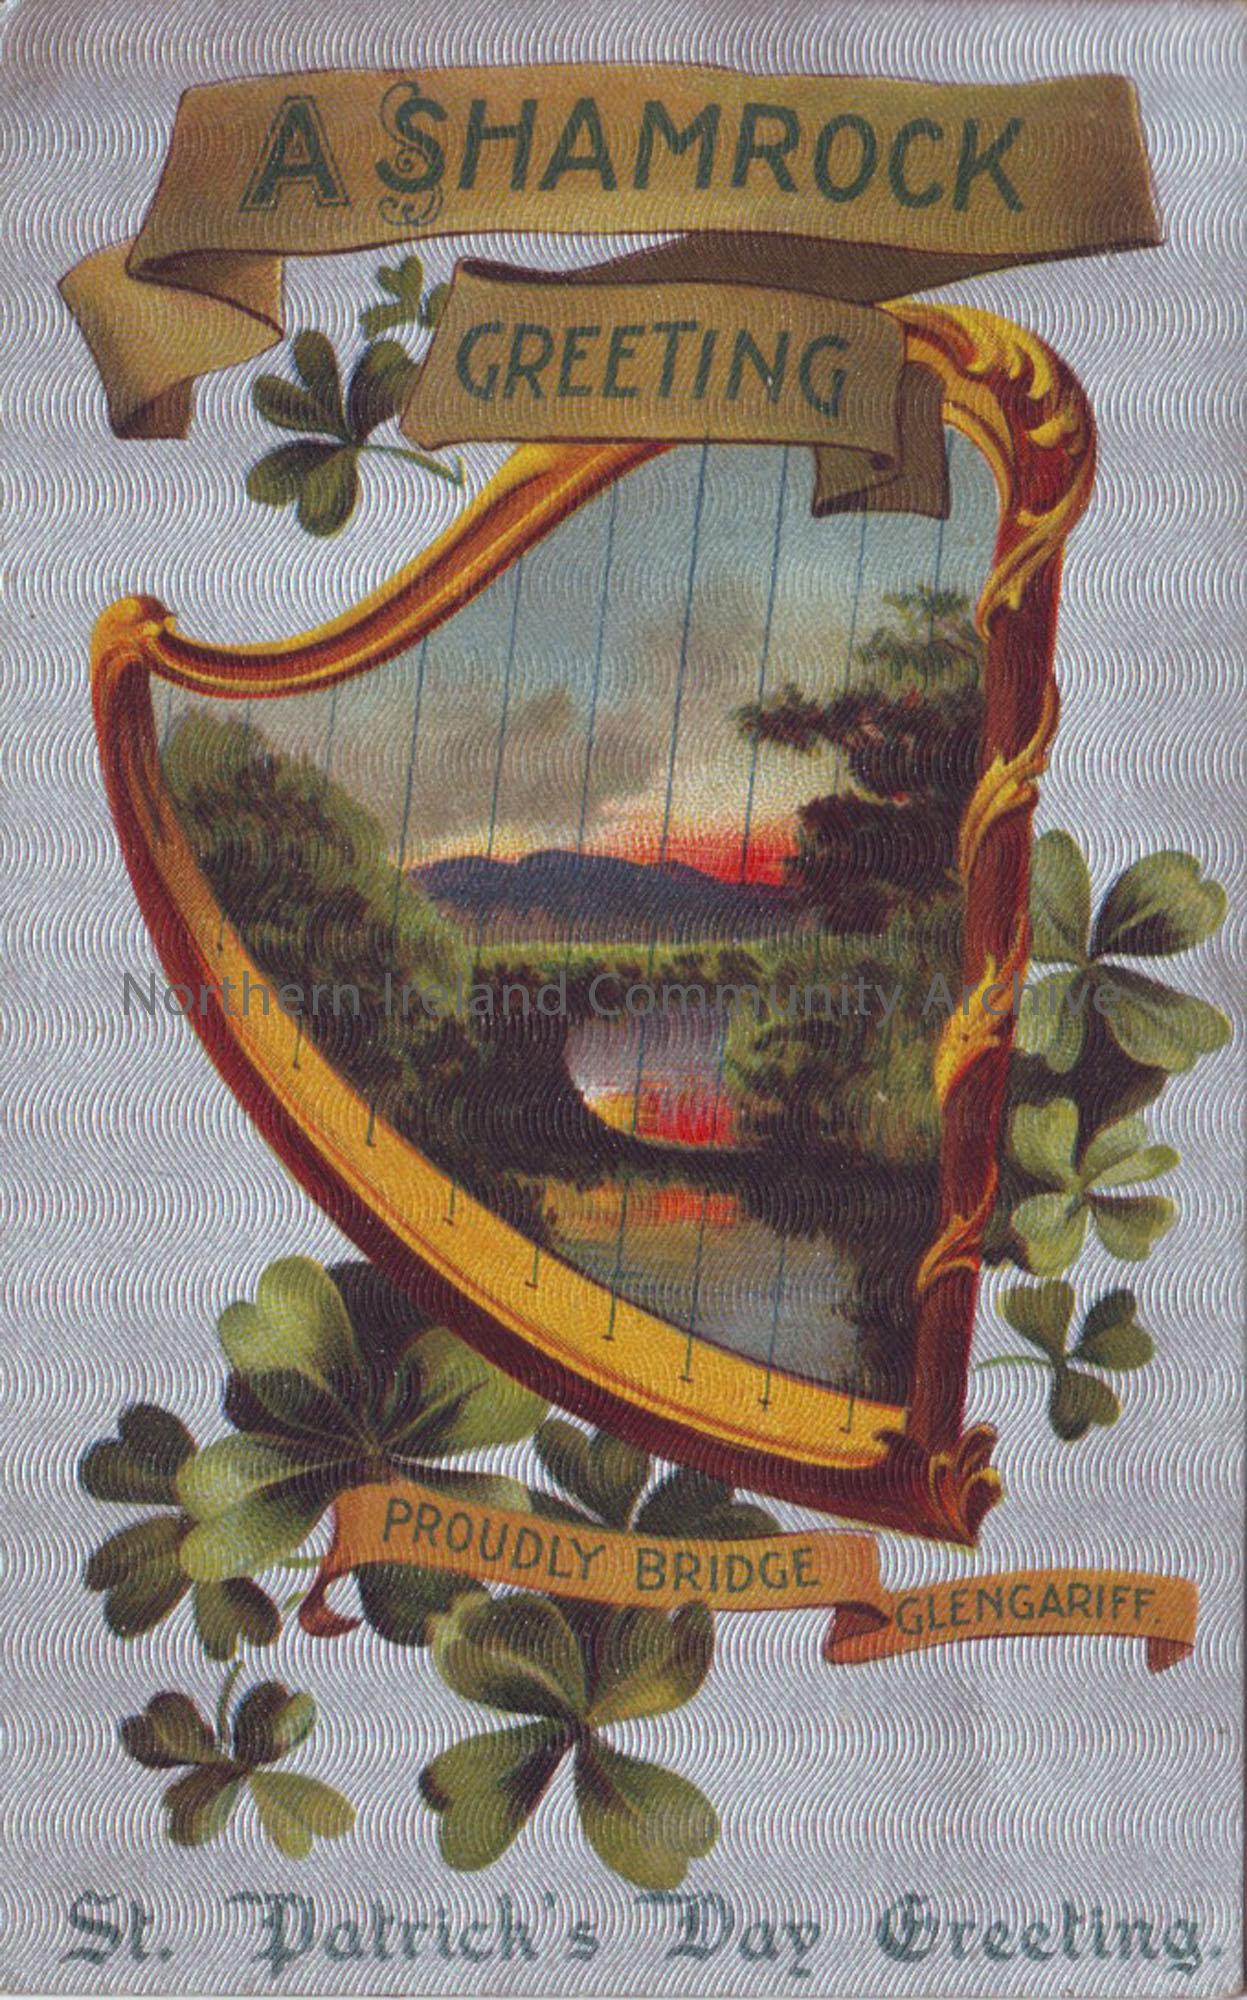 St. Patrick’s Day card, with silver background and landscape view inside a harp. Addressed to Miss Mary Olphert. Postmarked 17 March 1931